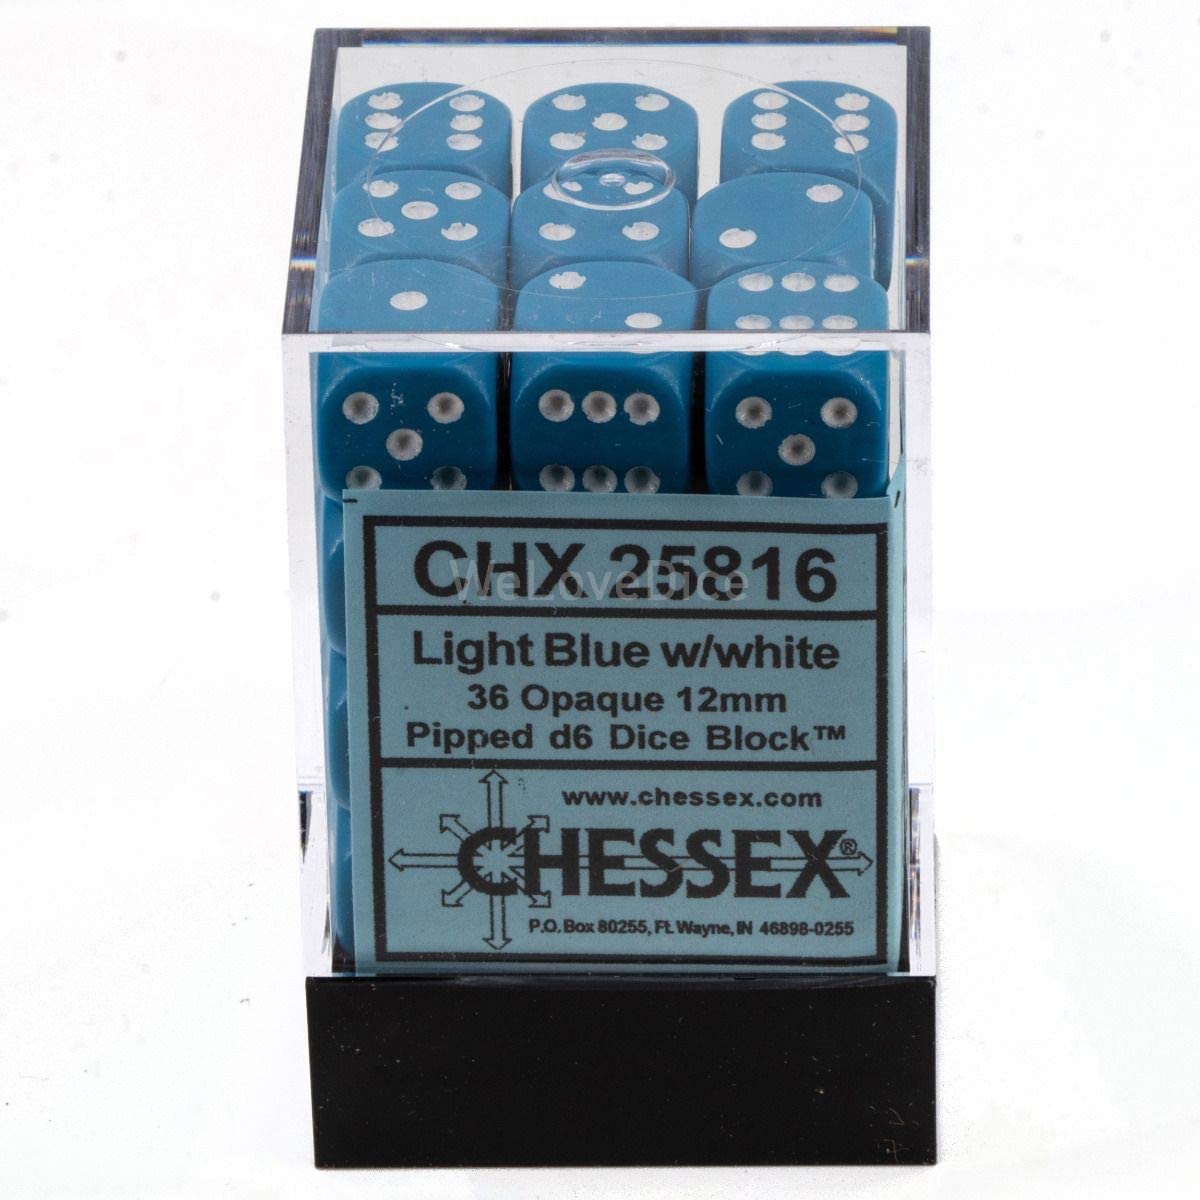 Chessex Dice: D6 Block 12mm - Opaque - Light Blue with White (CHX 25816) - Gamescape